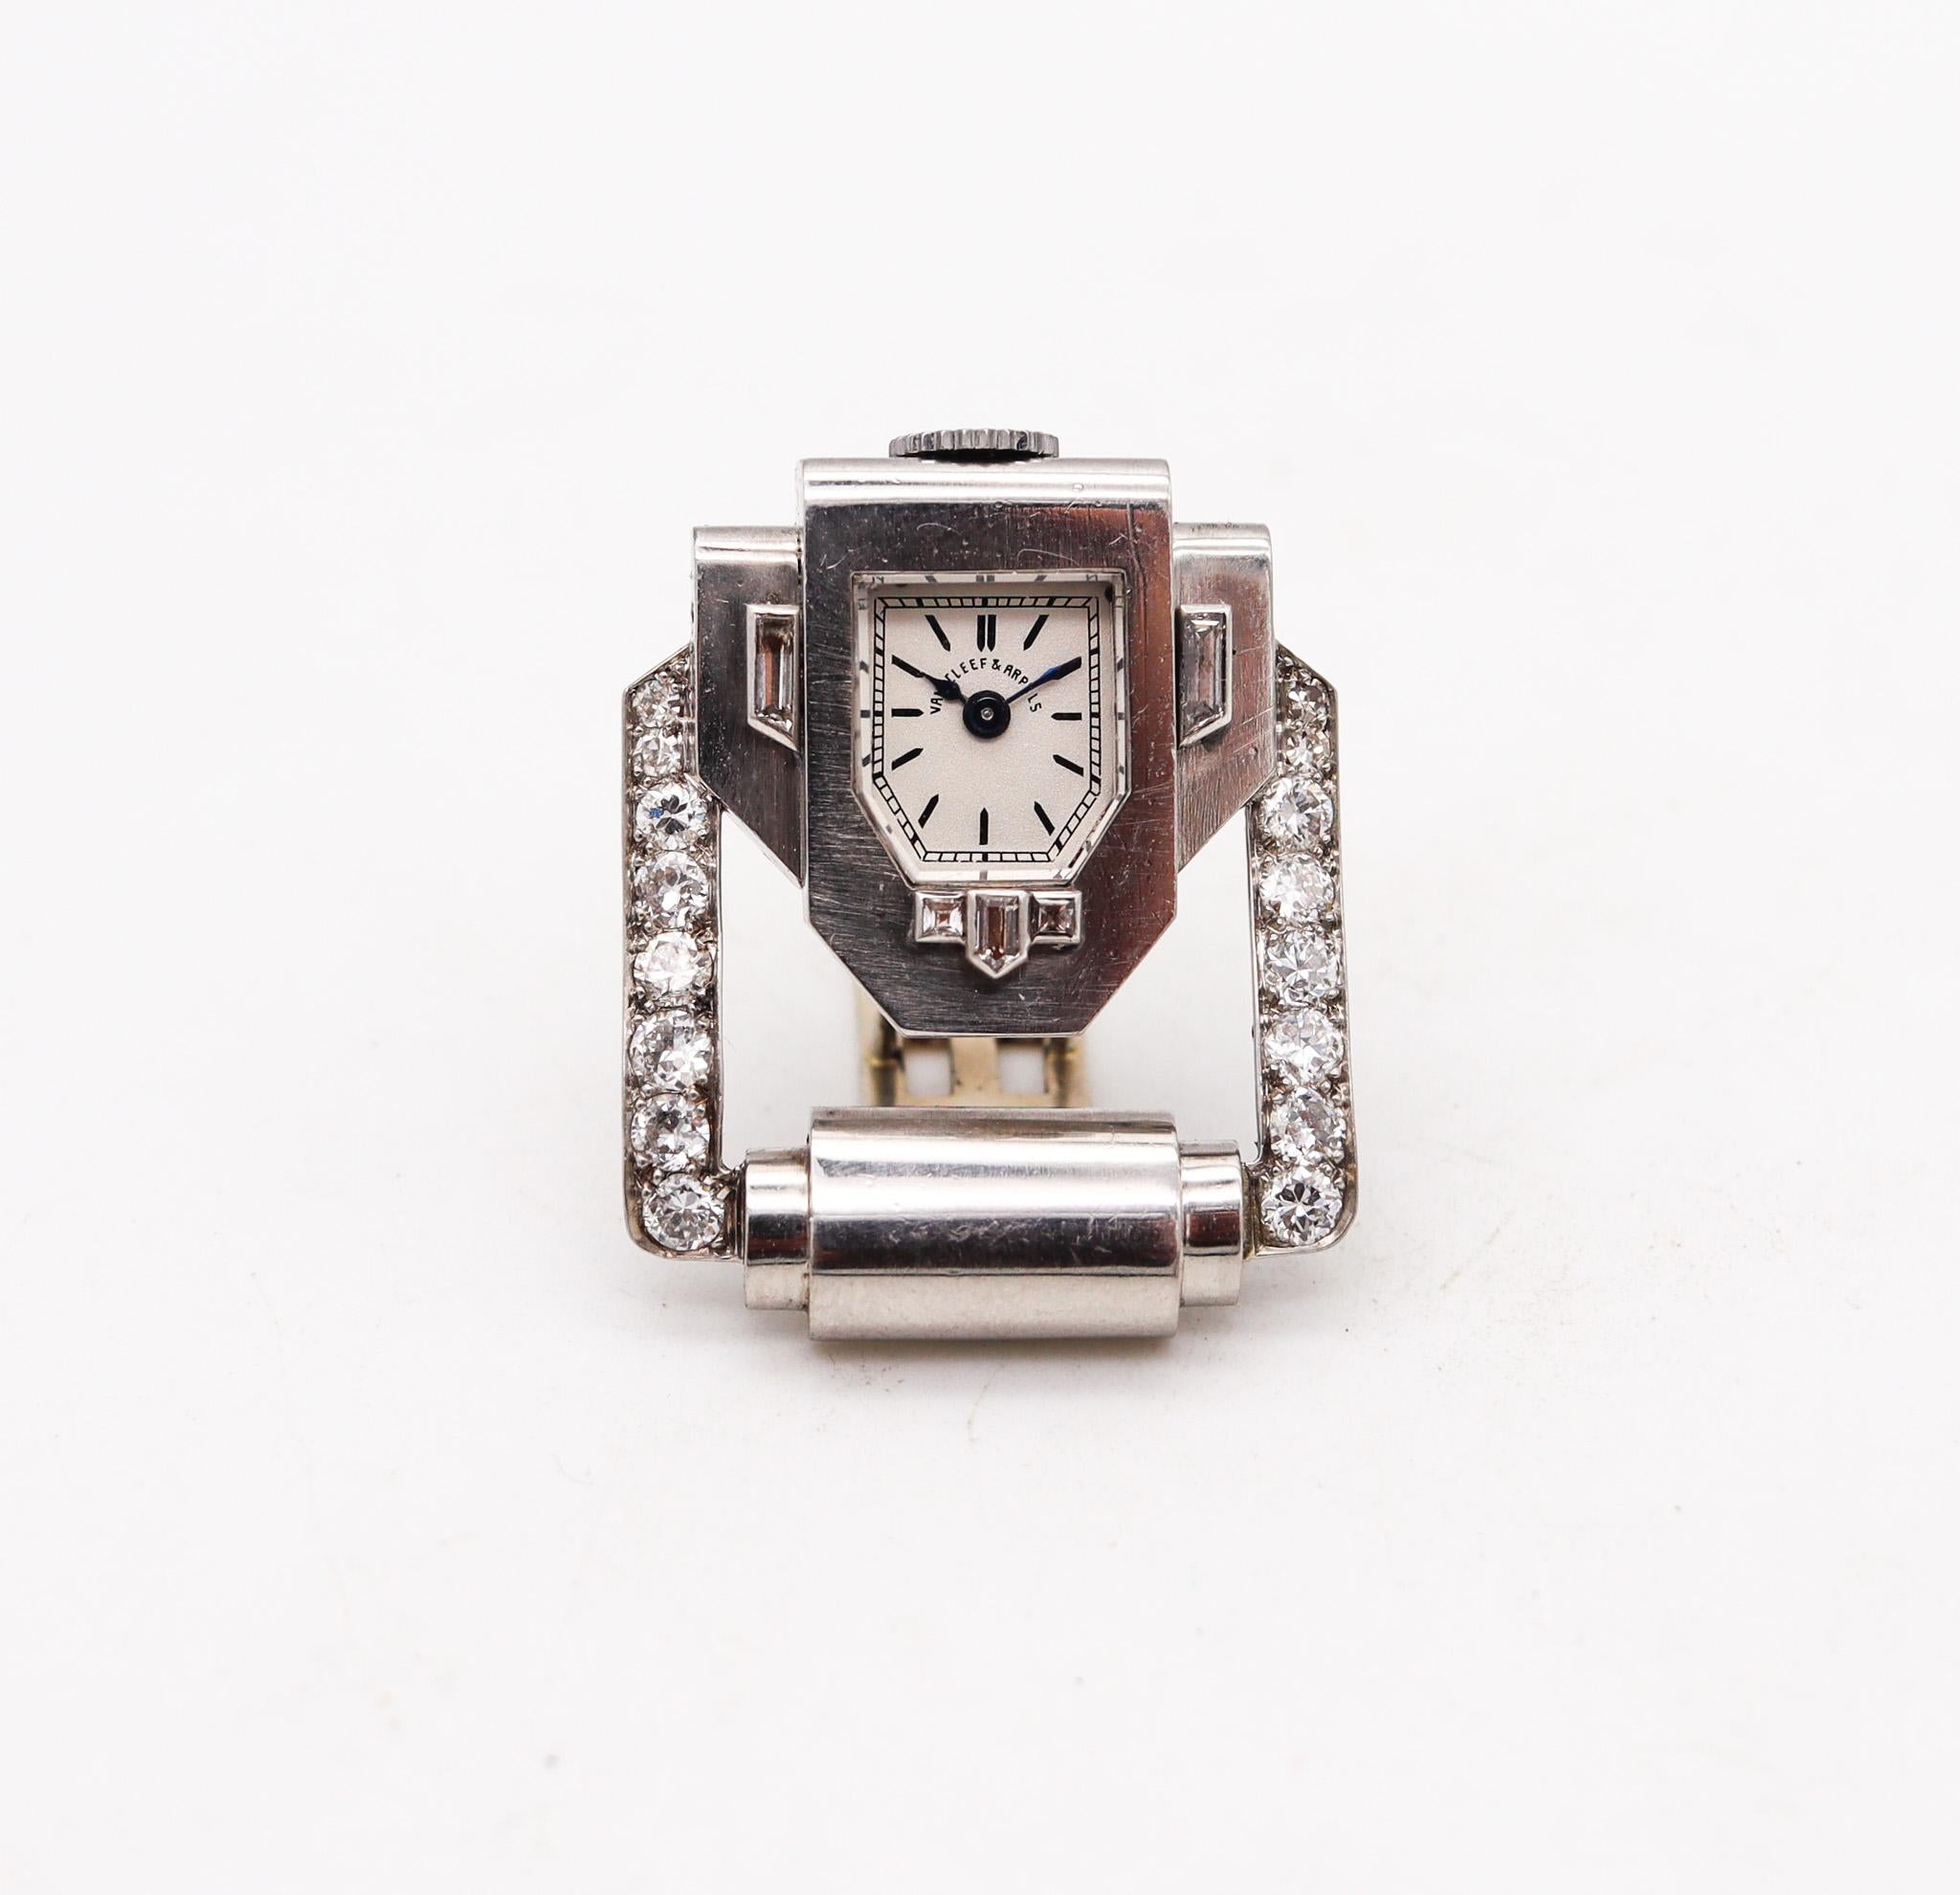 Art deco lapel clip watch designed by Van Cleef & Arpels.

Fabulous and very rare lapel clip watch, created during the art deco period in Paris France by the jewelry house of Van Cleef & Arpels, back in the 1925. The Brooch of most innovating and